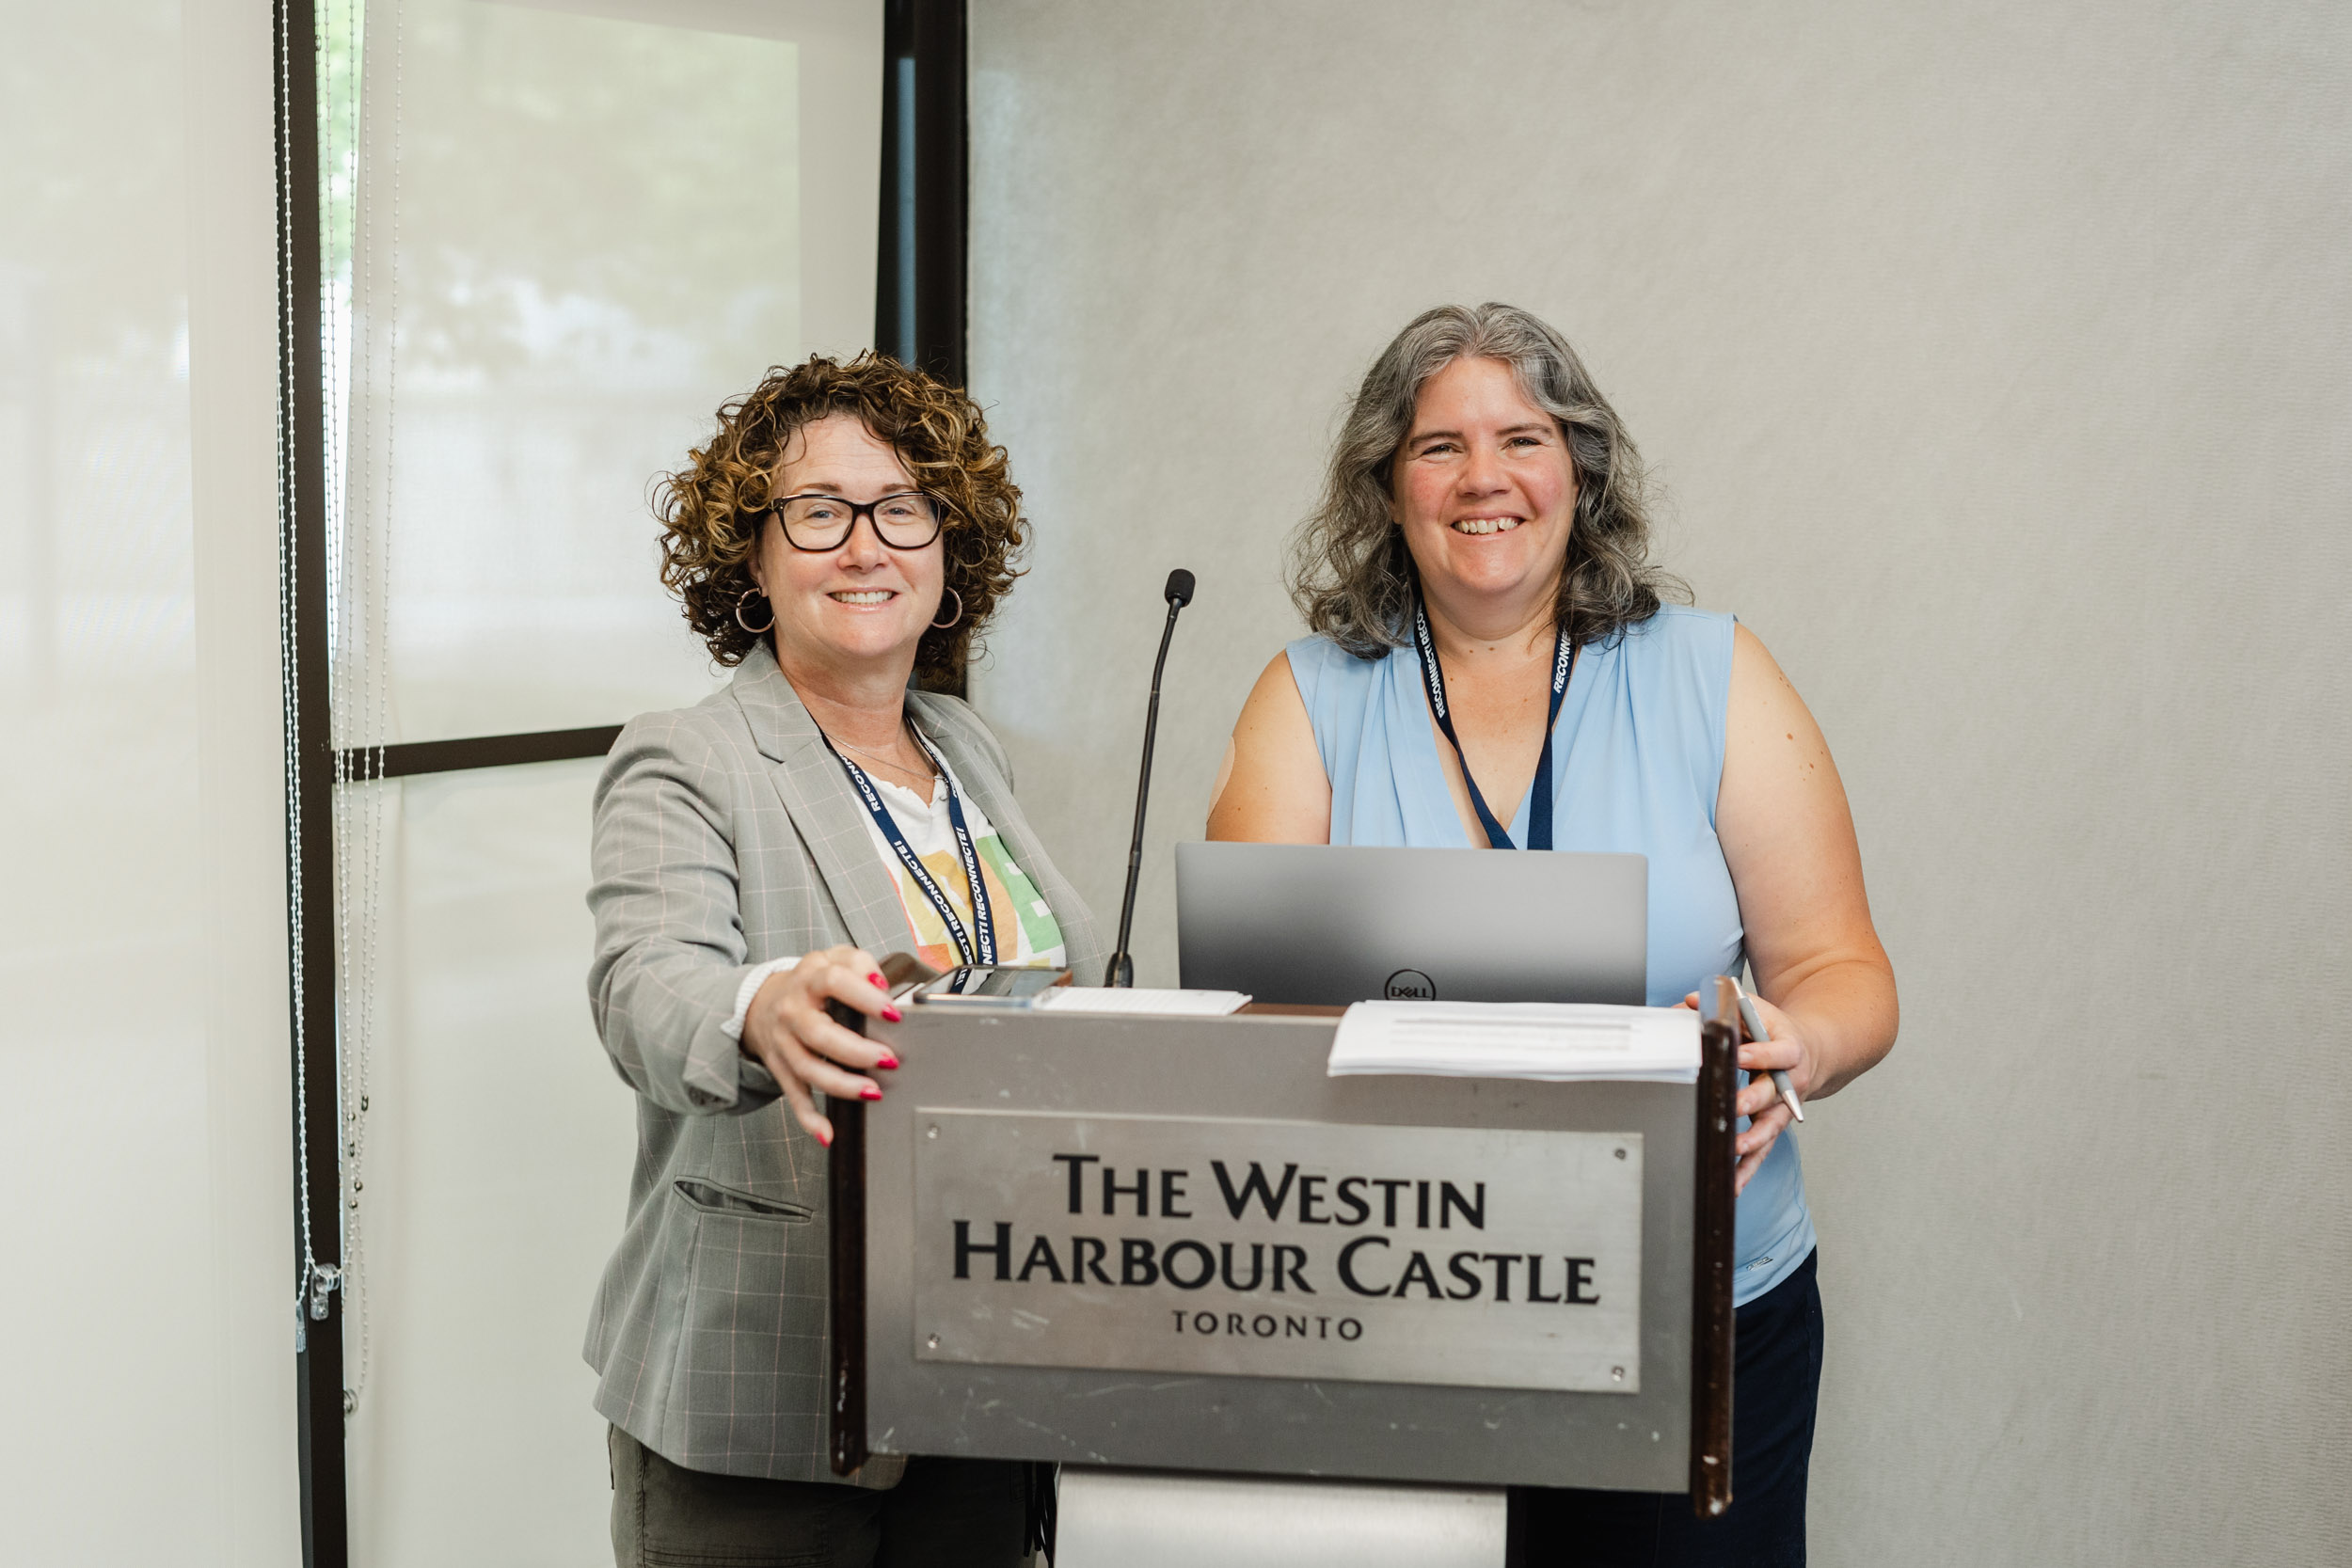 Conference Photography: Women on podium.